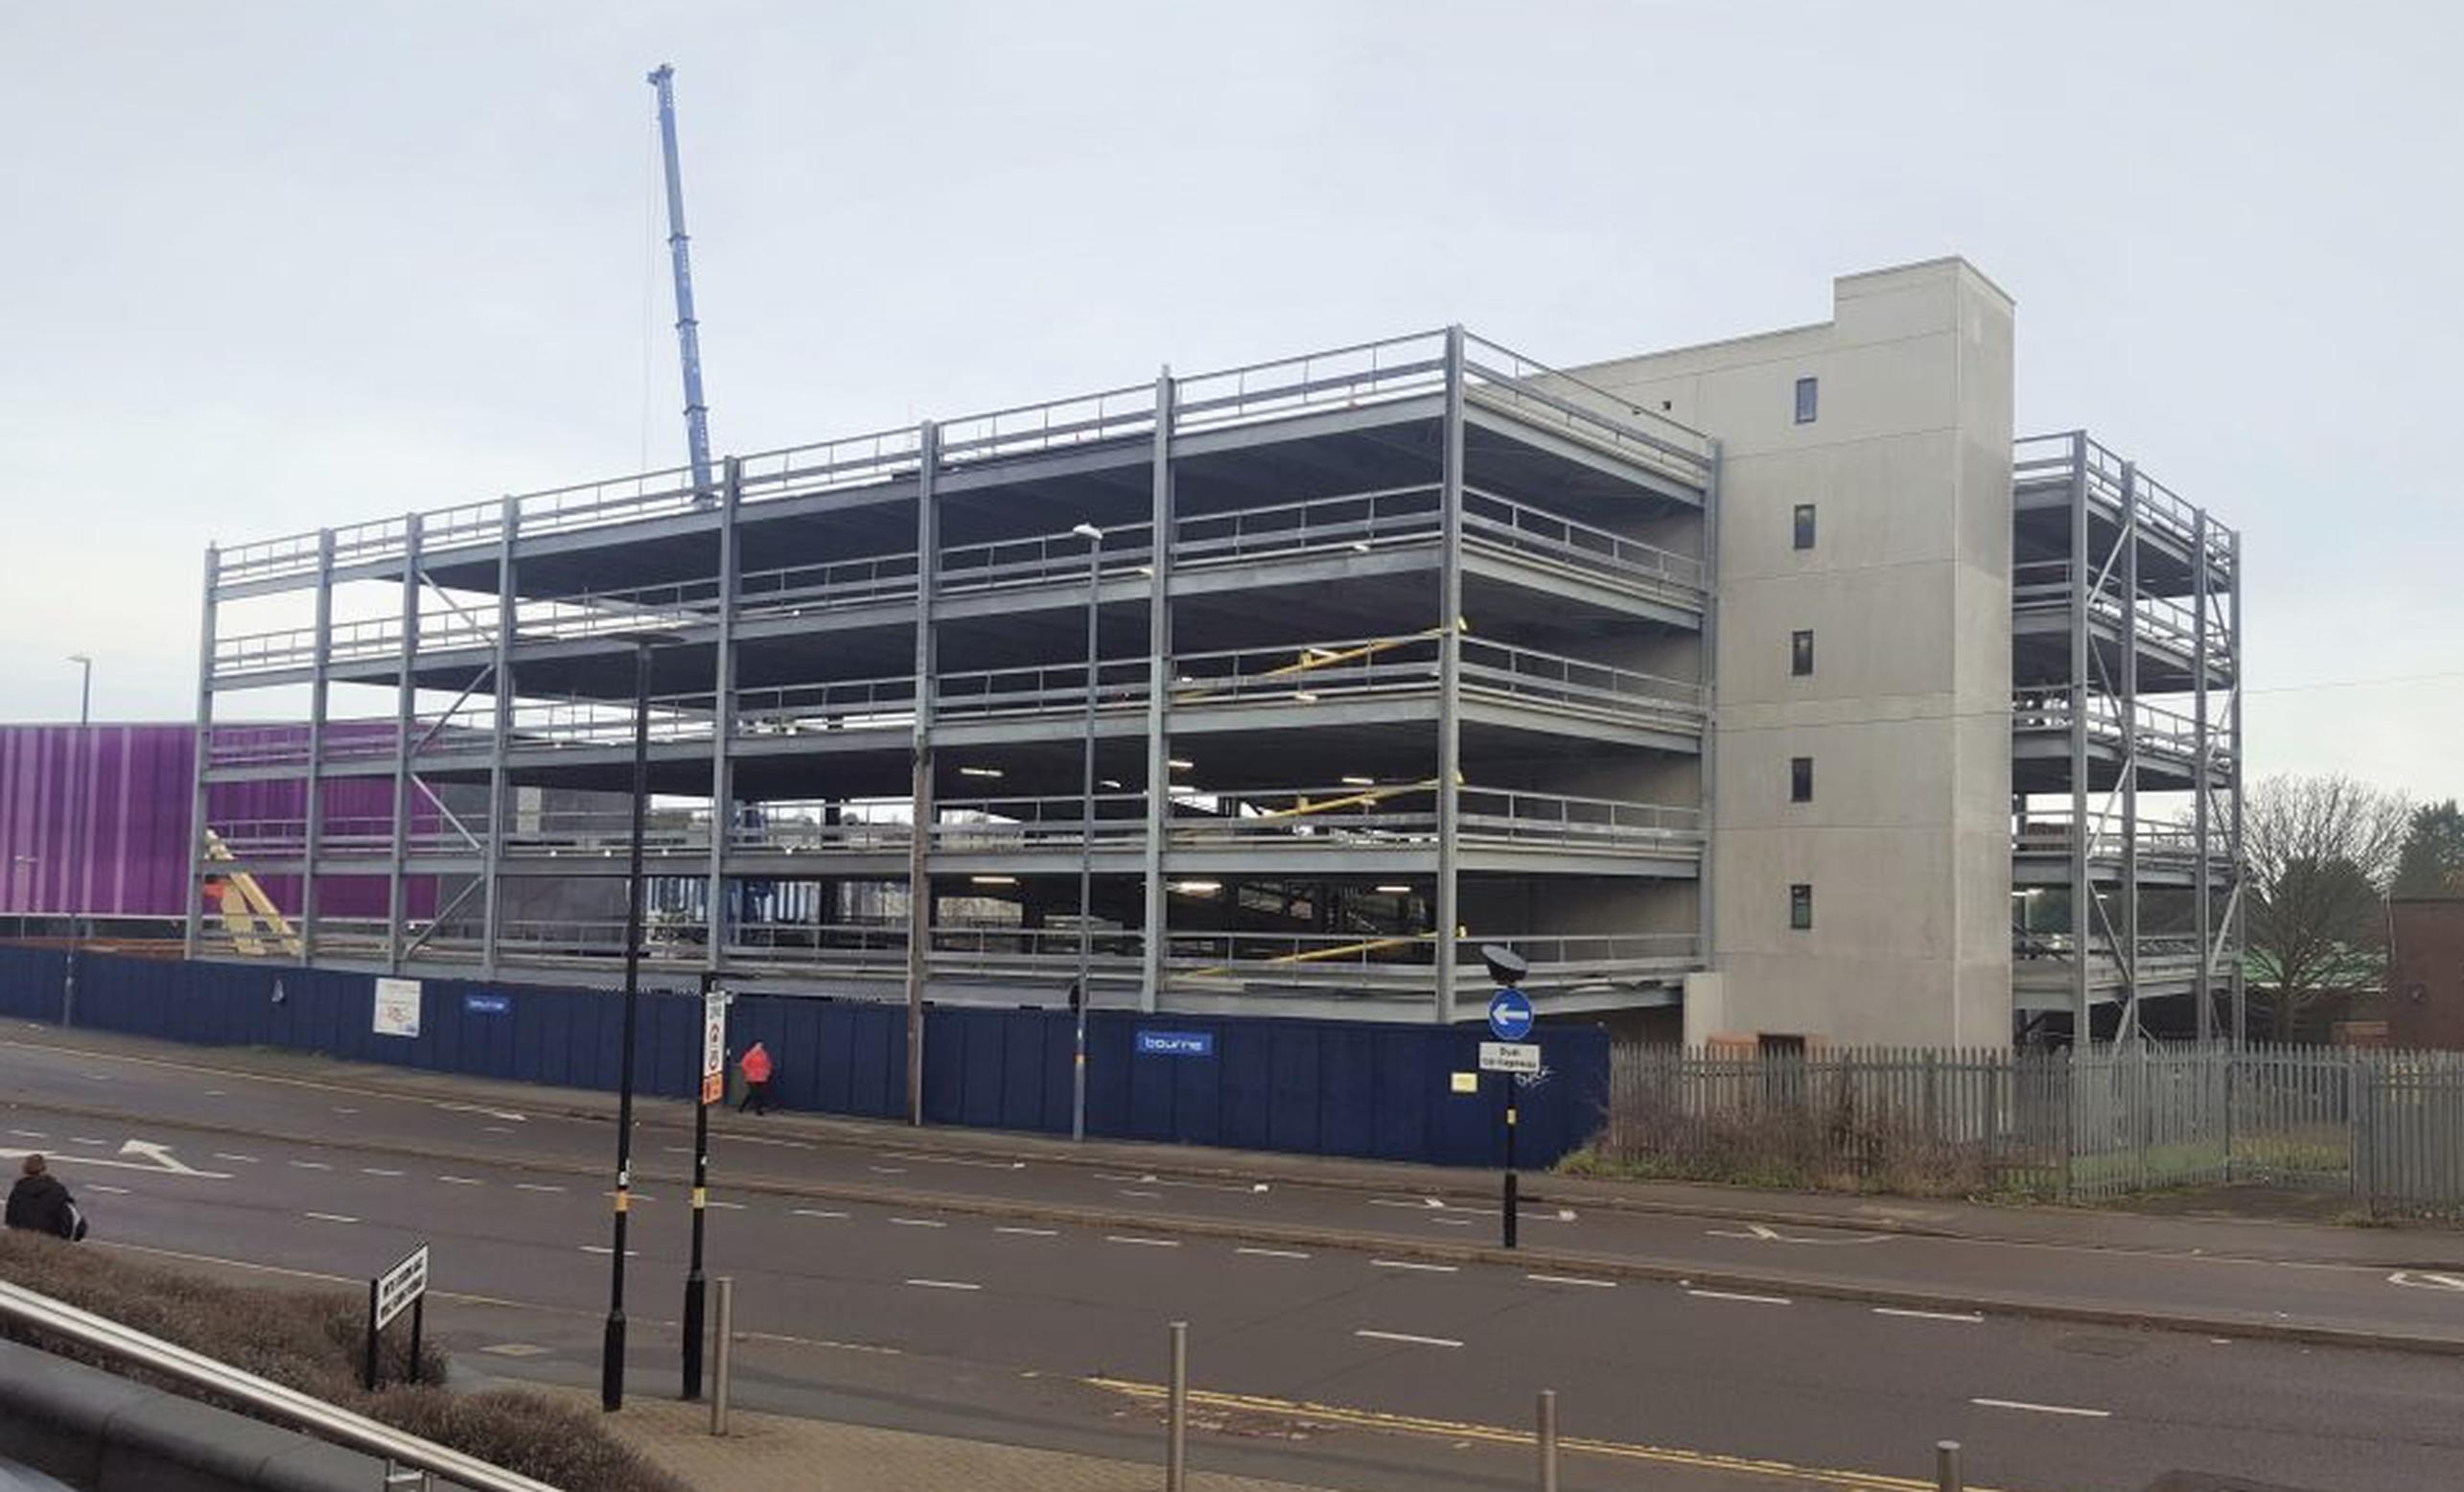 Construction work is continuing on the Longbridge P&R car park but, once complete, it could be mothballed